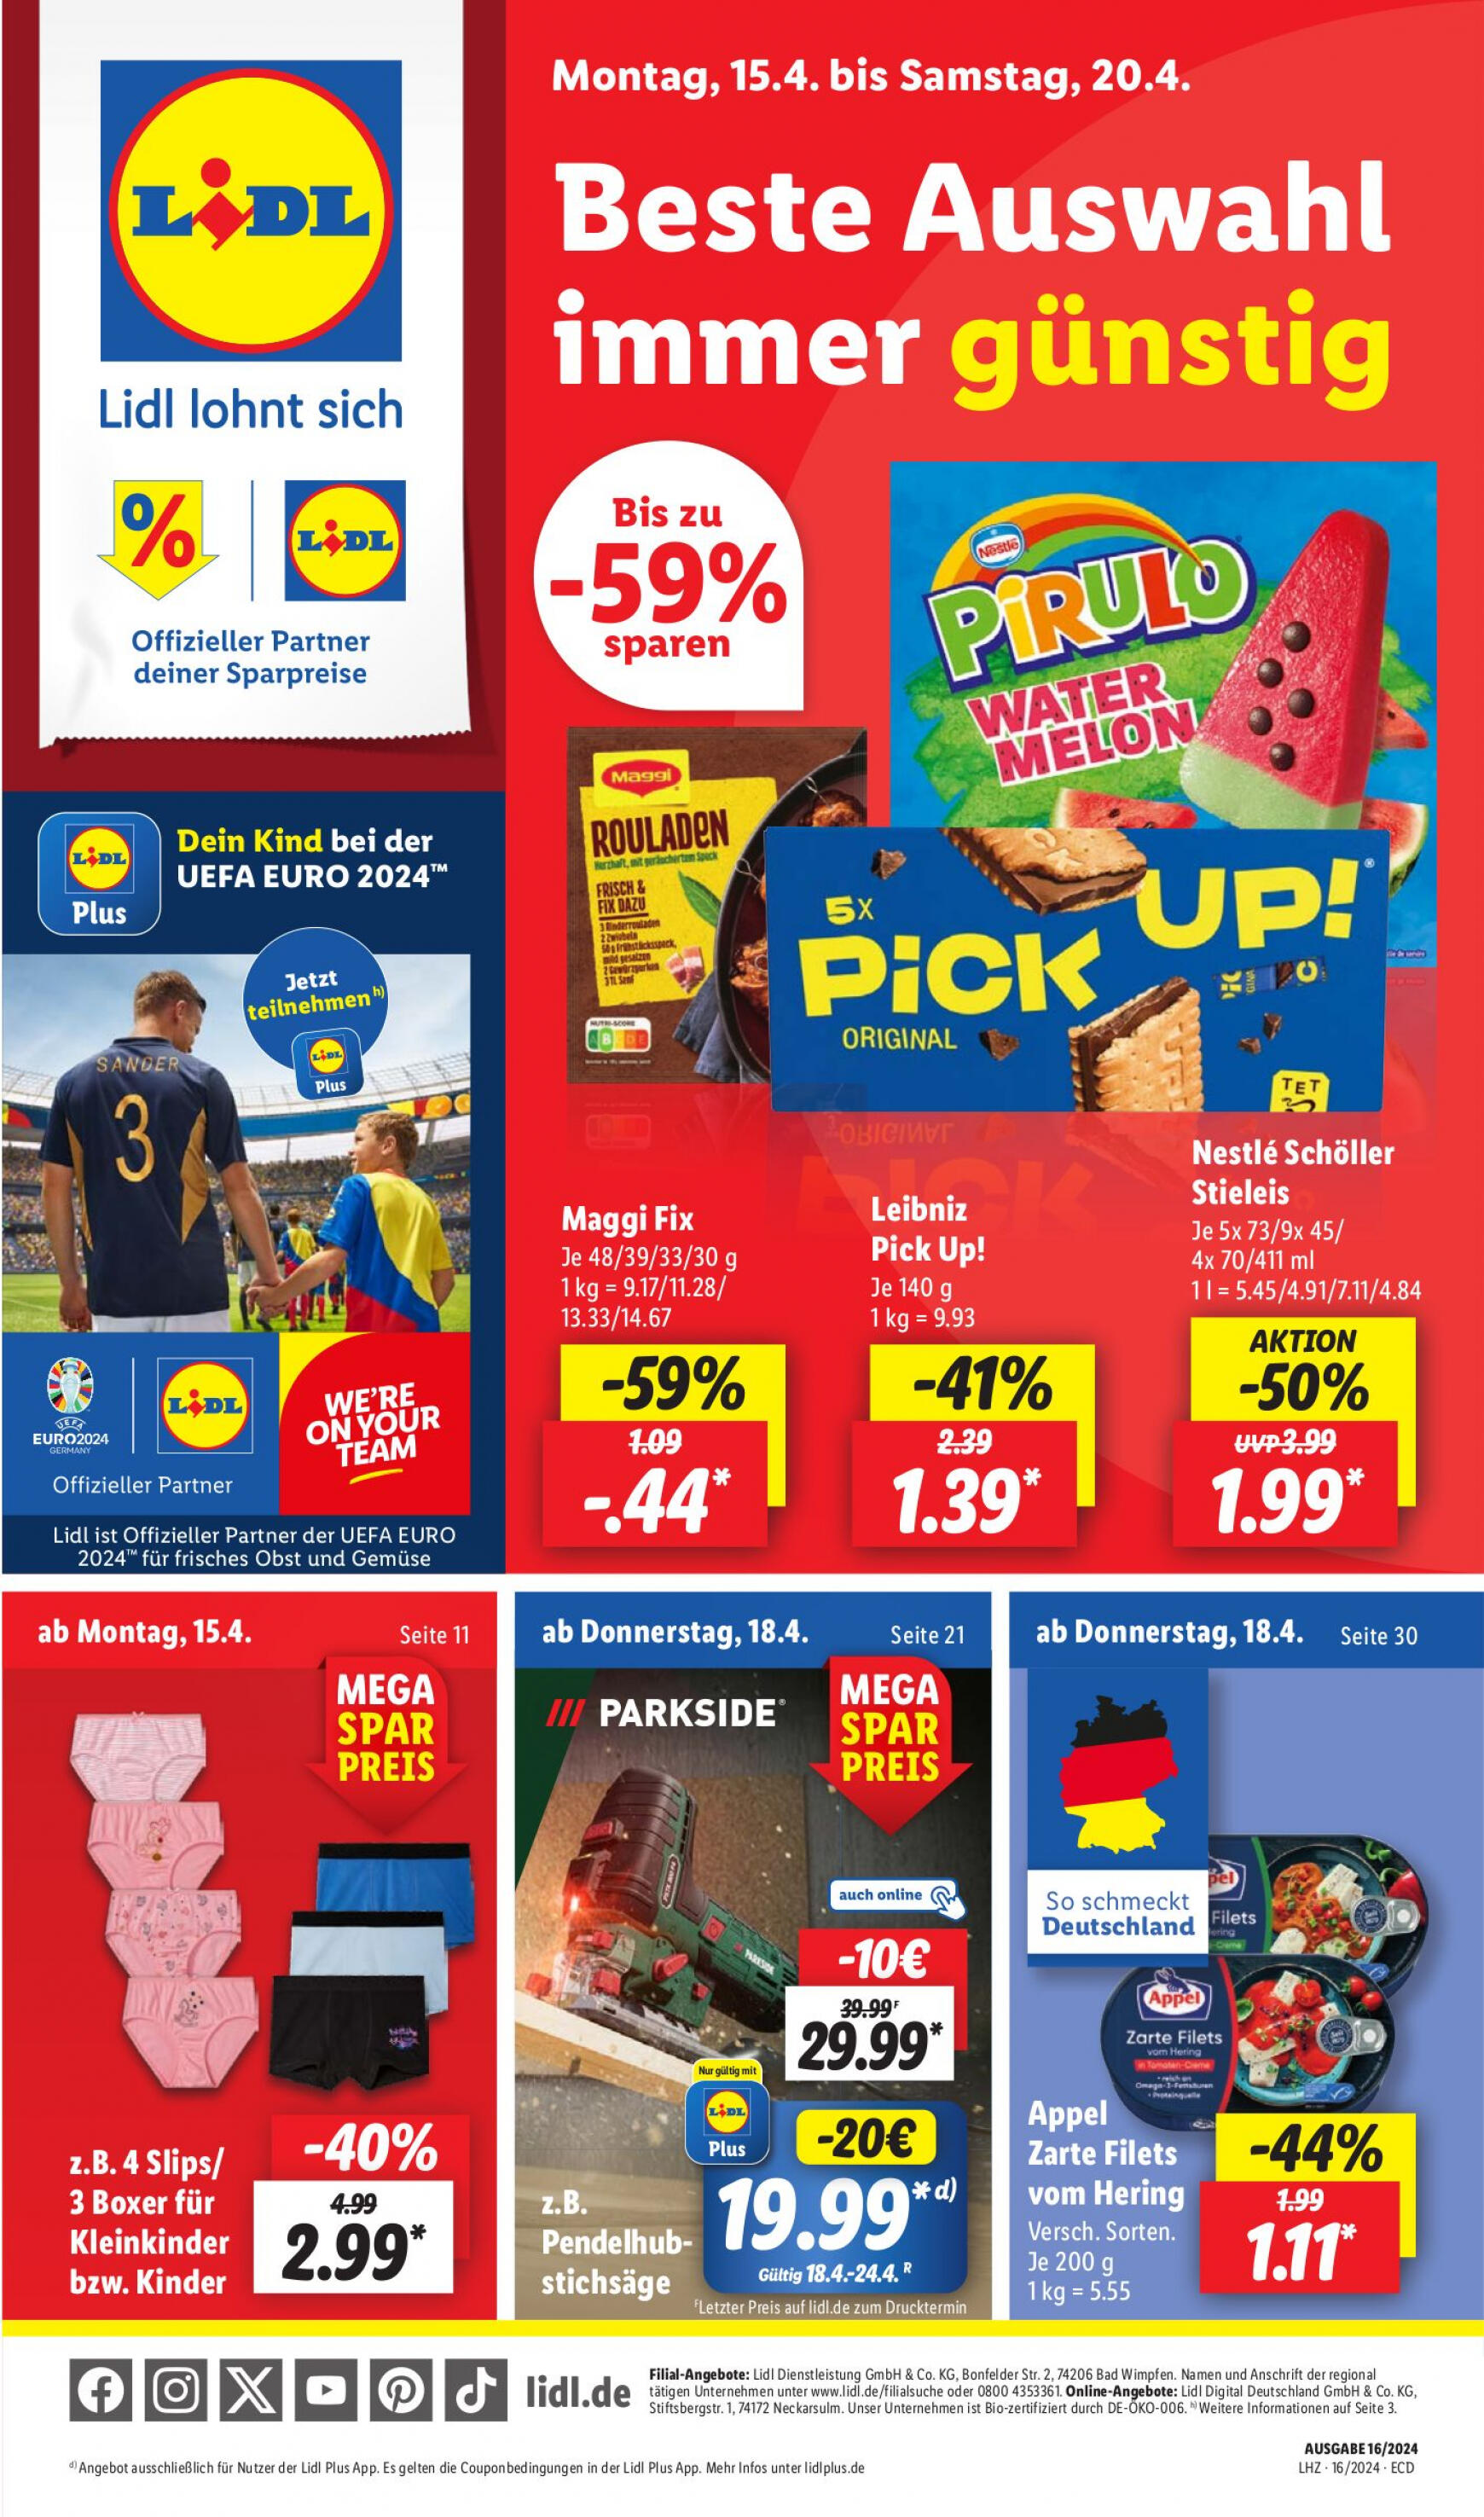 lidl - Flyer Lidl aktuell 15.04. - 20.04. - page: 1